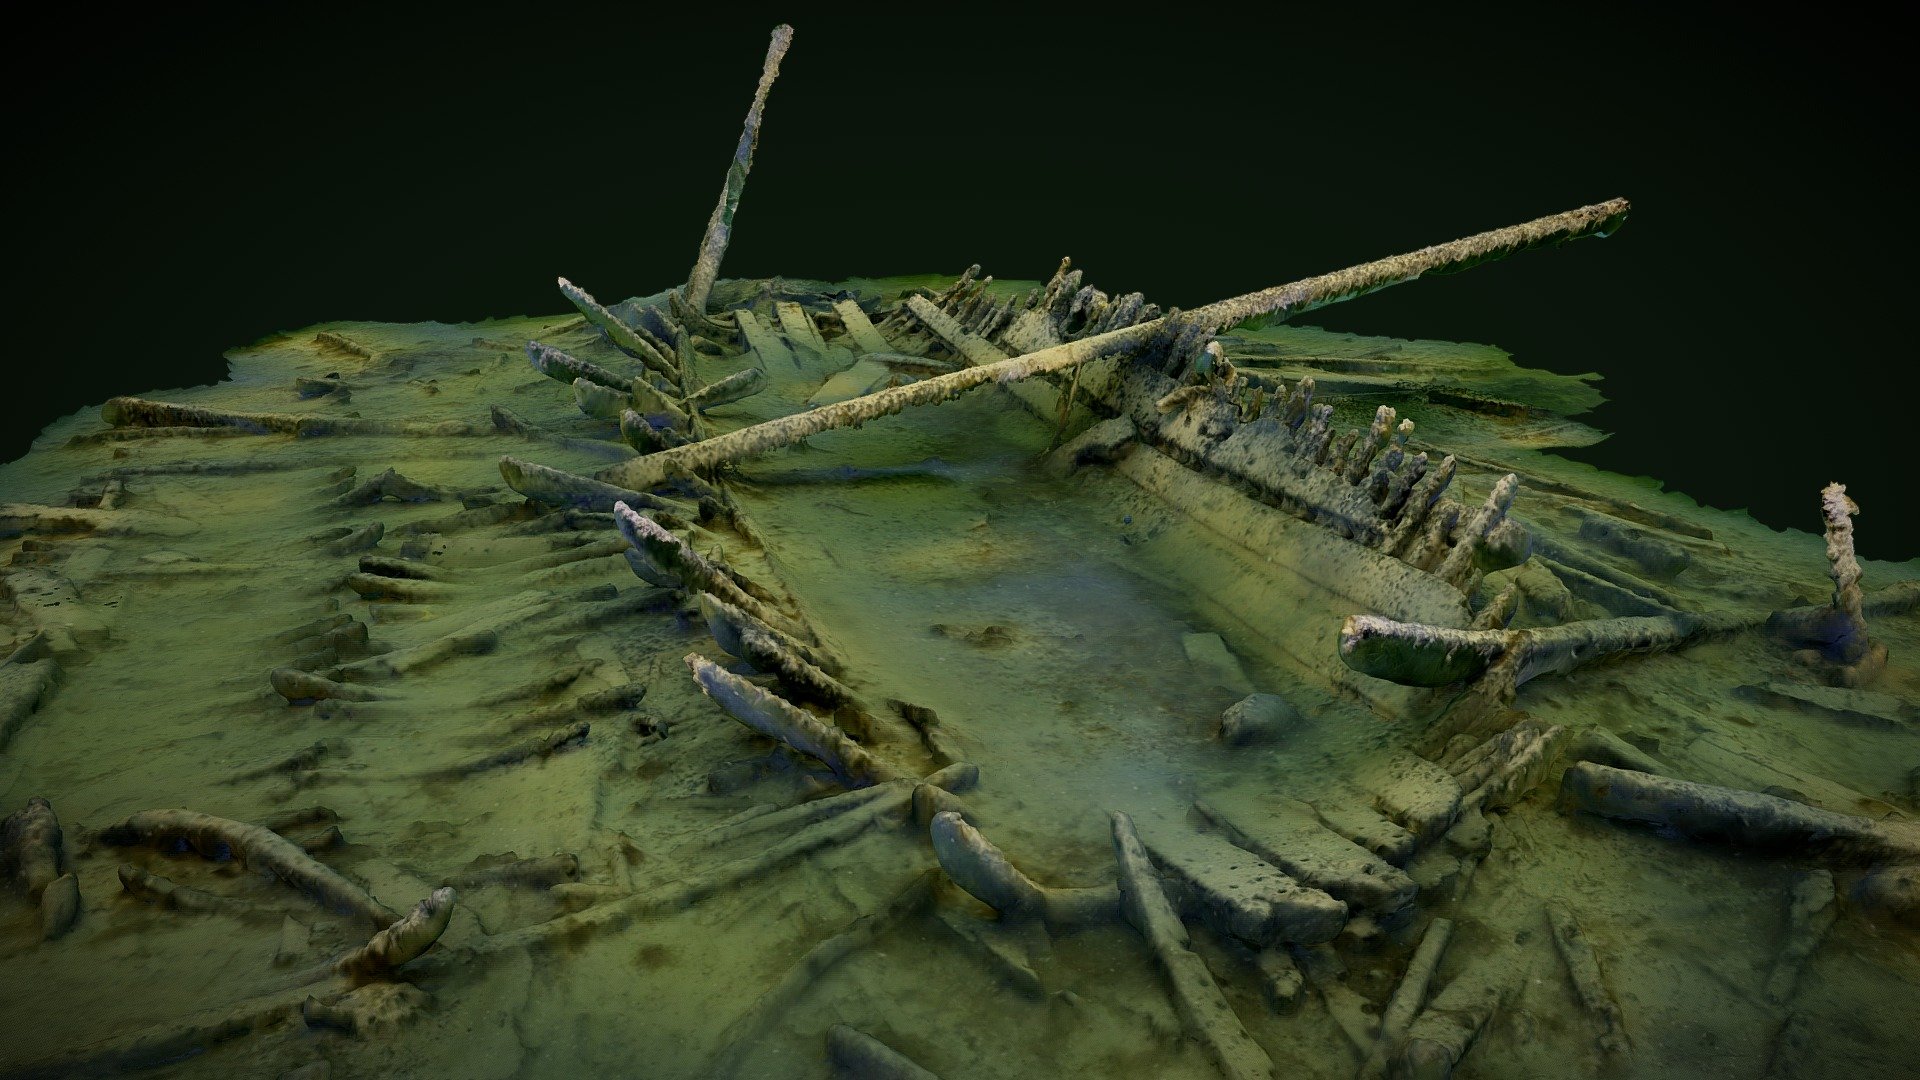 One of the oldest wrecks in Finland, dating from 16th century based on artefact findings. Probably from northern Germany. Made of oak.

The ship is lying on her port side. Stern post is still standing. Length appr. 18 m and depth 15 m.

(© Samuli Haataja / assistance by Jukka Sulku) - Wreck of Metskär, Örö FI - 3D model by Nautic Club Urheilusukeltajat ry (@nauticclubry) 3d model